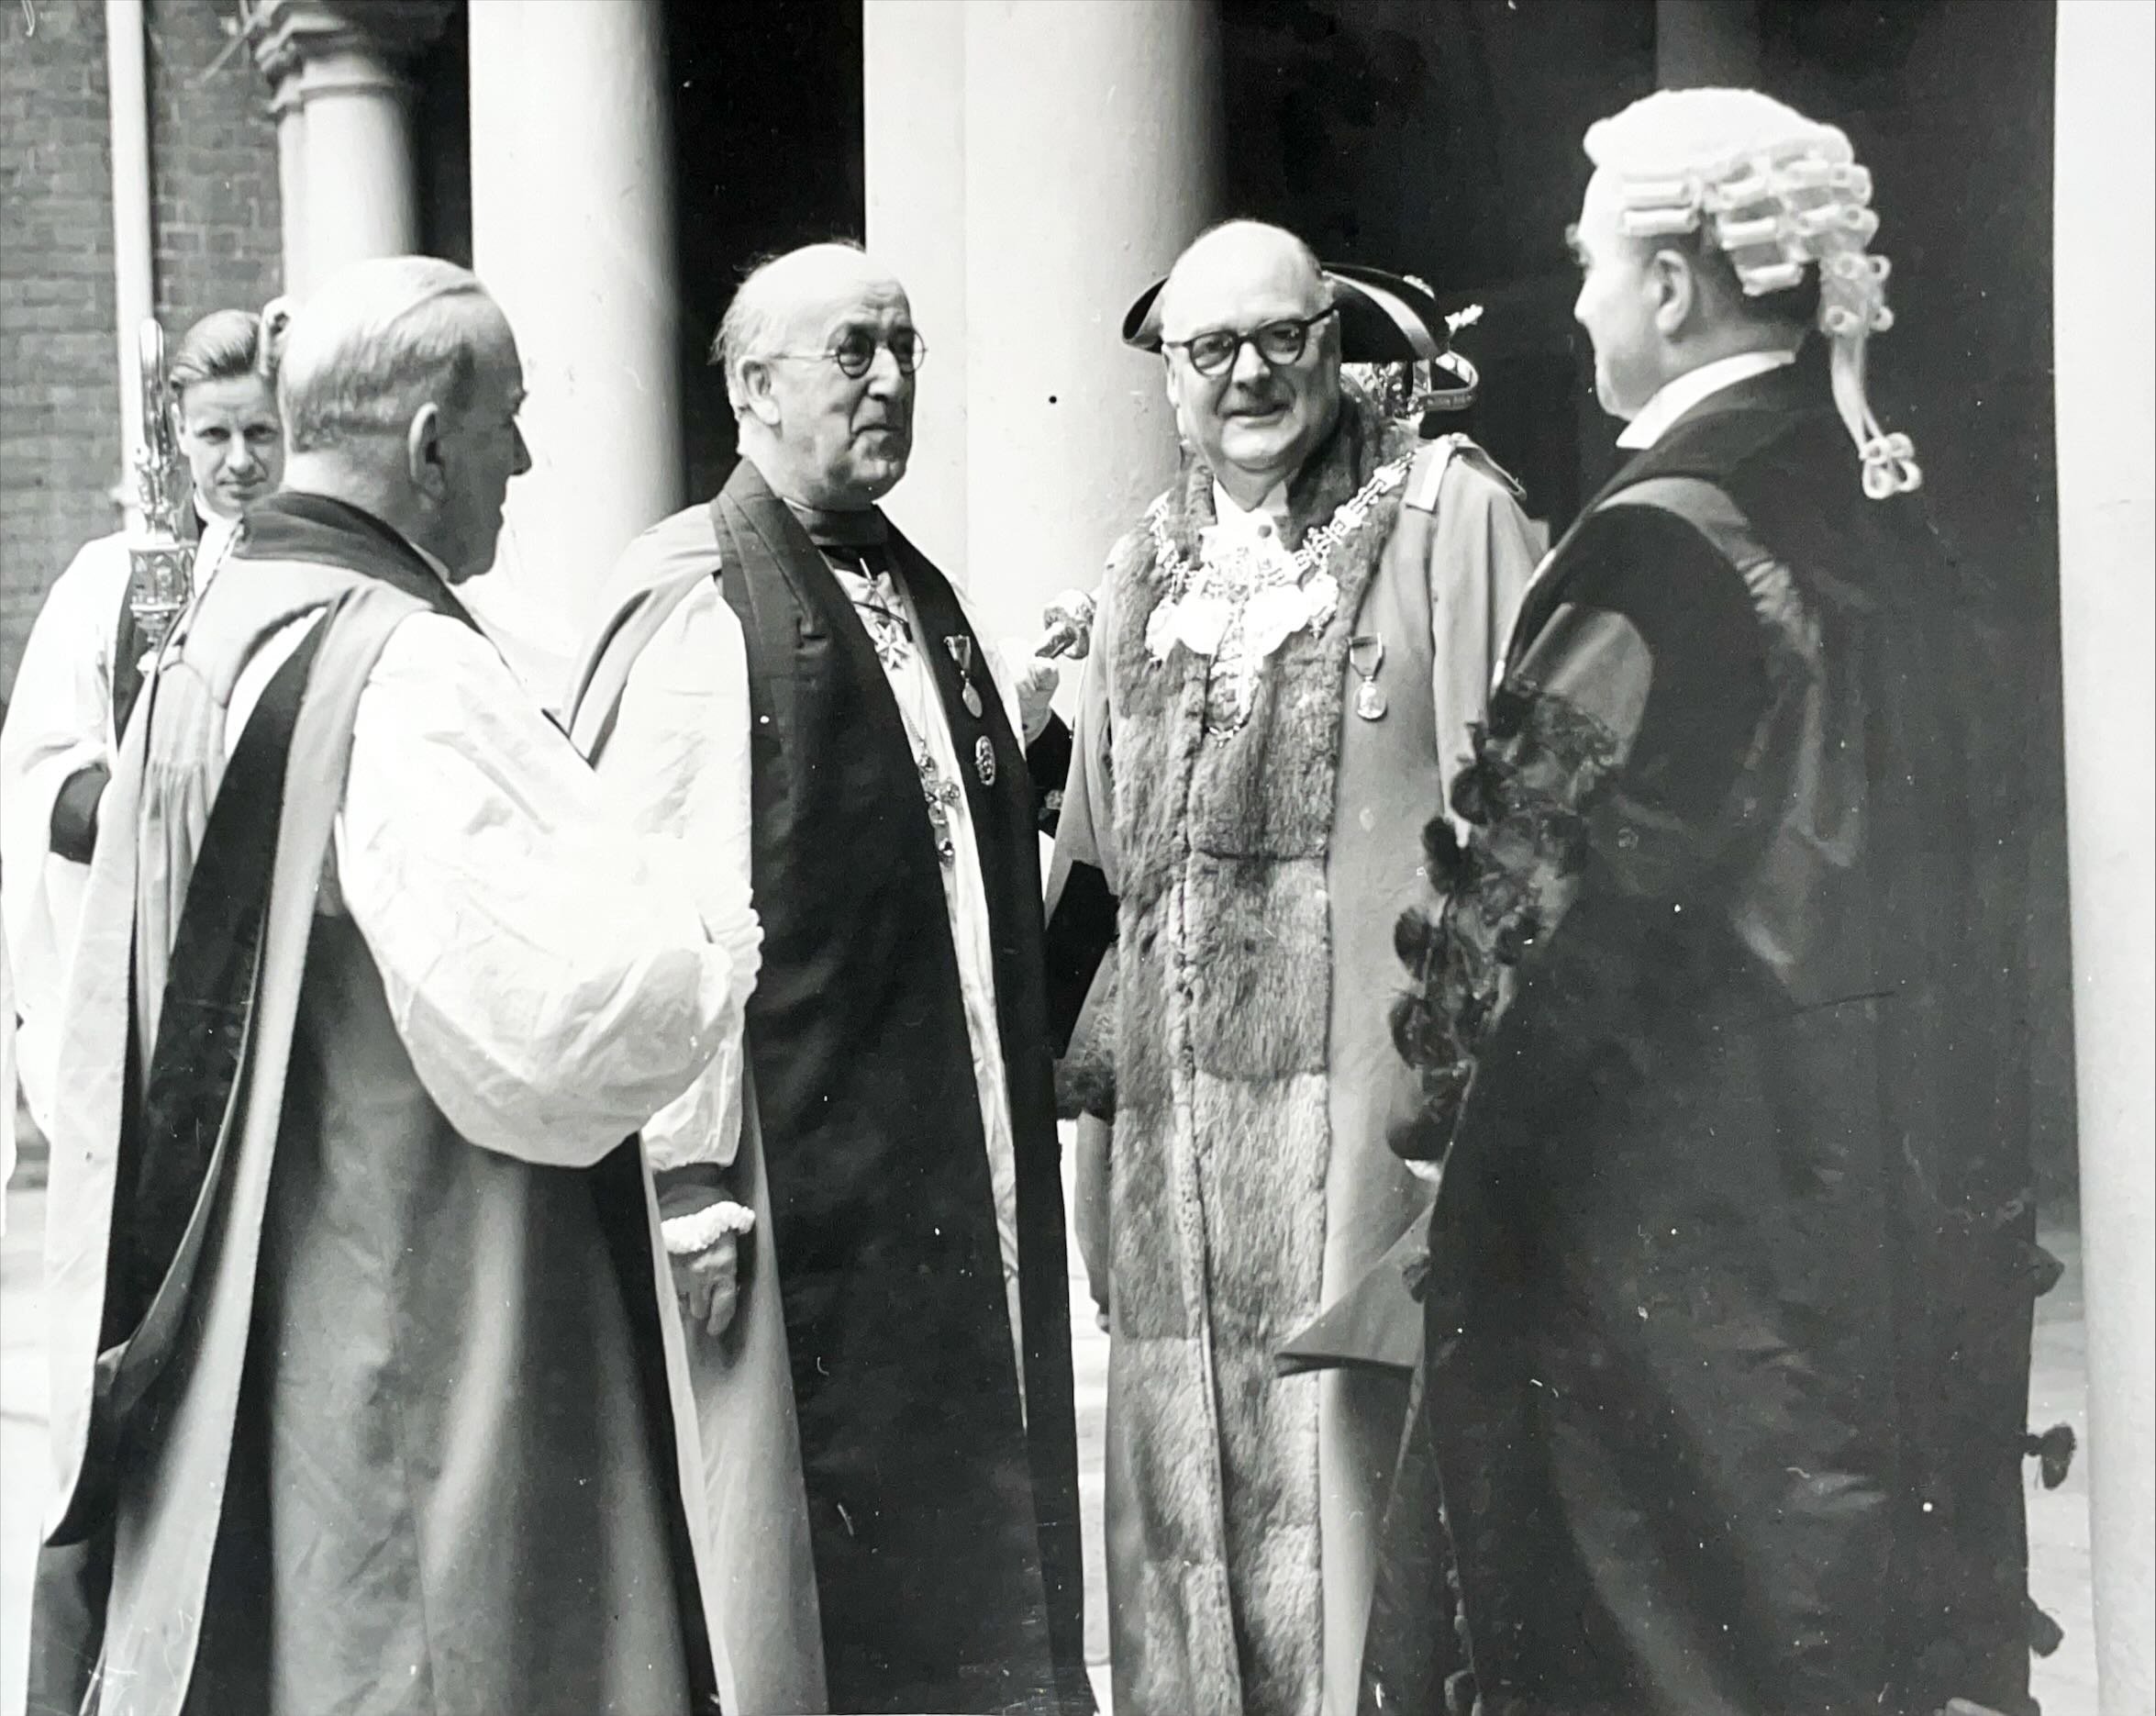 Inauguration of the Celebrations for the 27th Jubilee of the Diocese by the Archbishop of Canterbury, May 1954 (1 of 2)